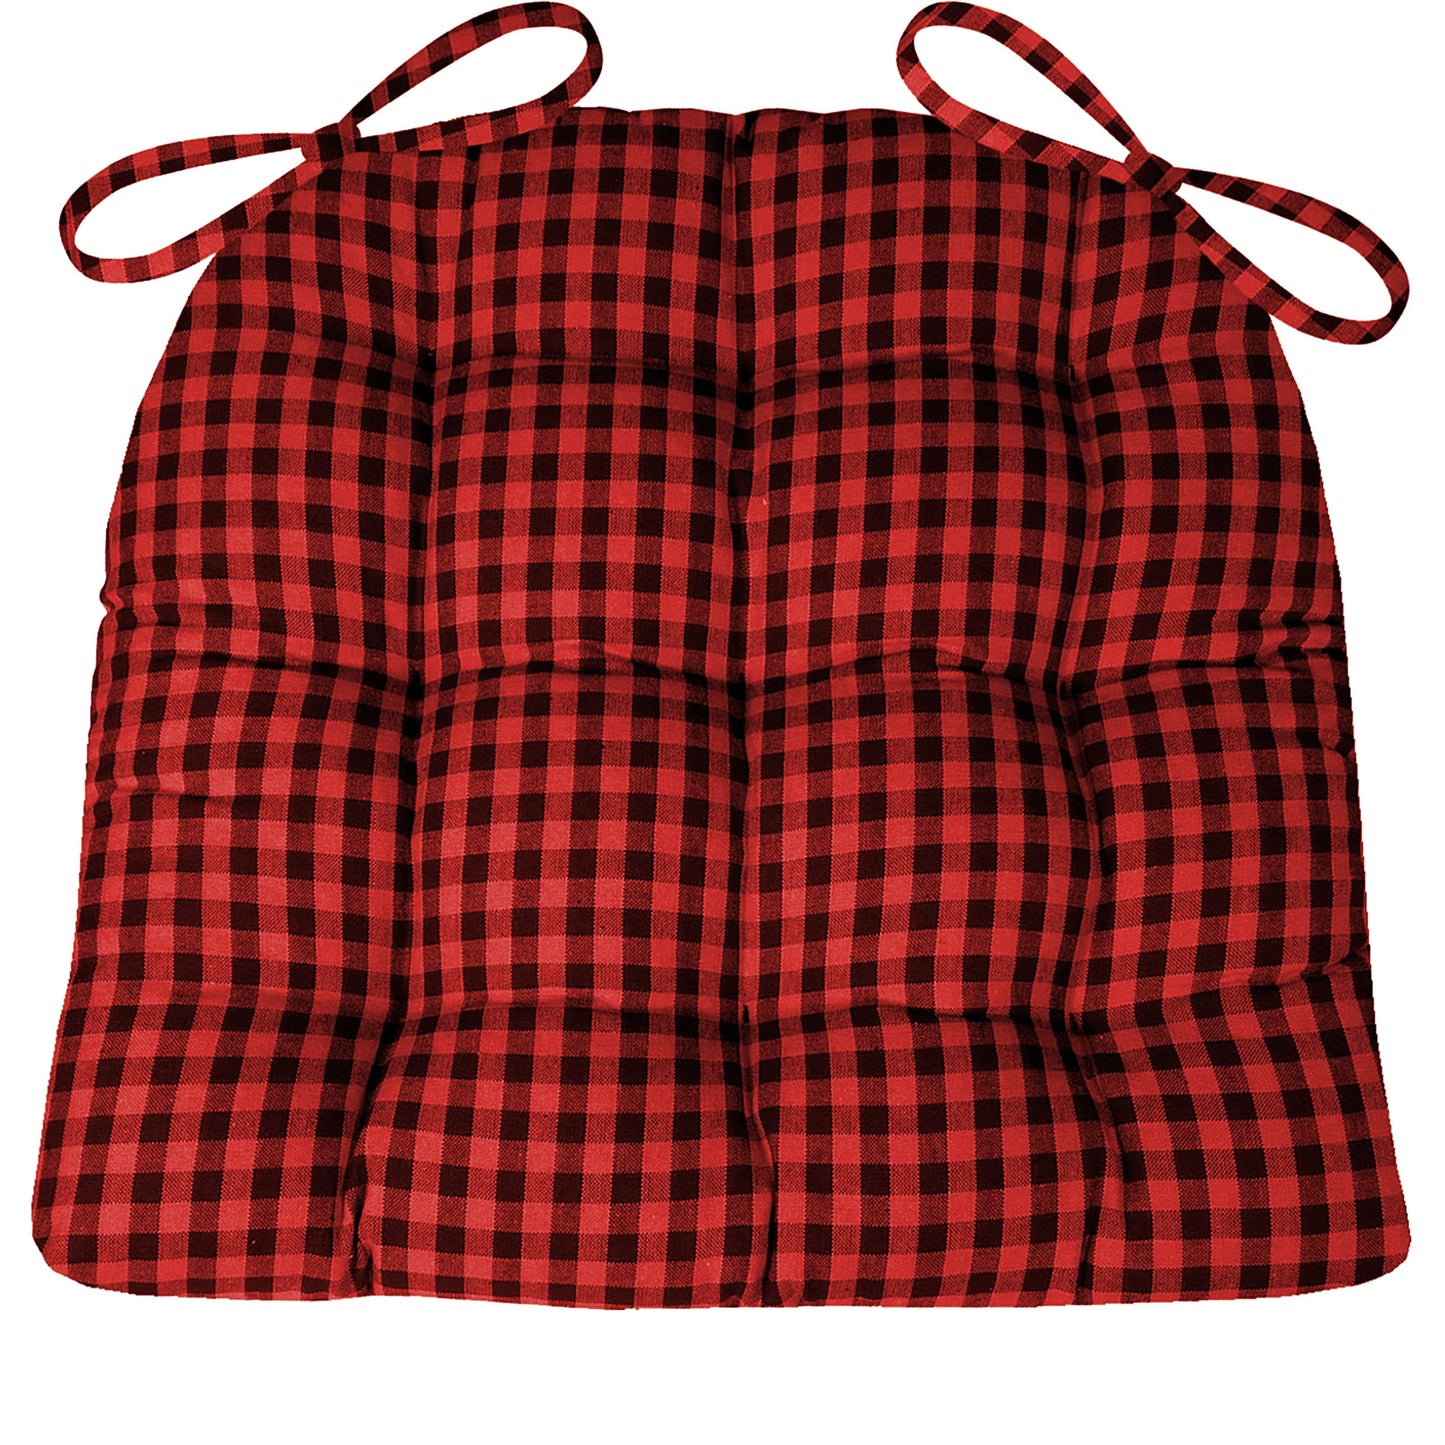 Checkers Red and Black Dining Chair Cushion | Barnett Home Decor | Black & Red - Cotton - American